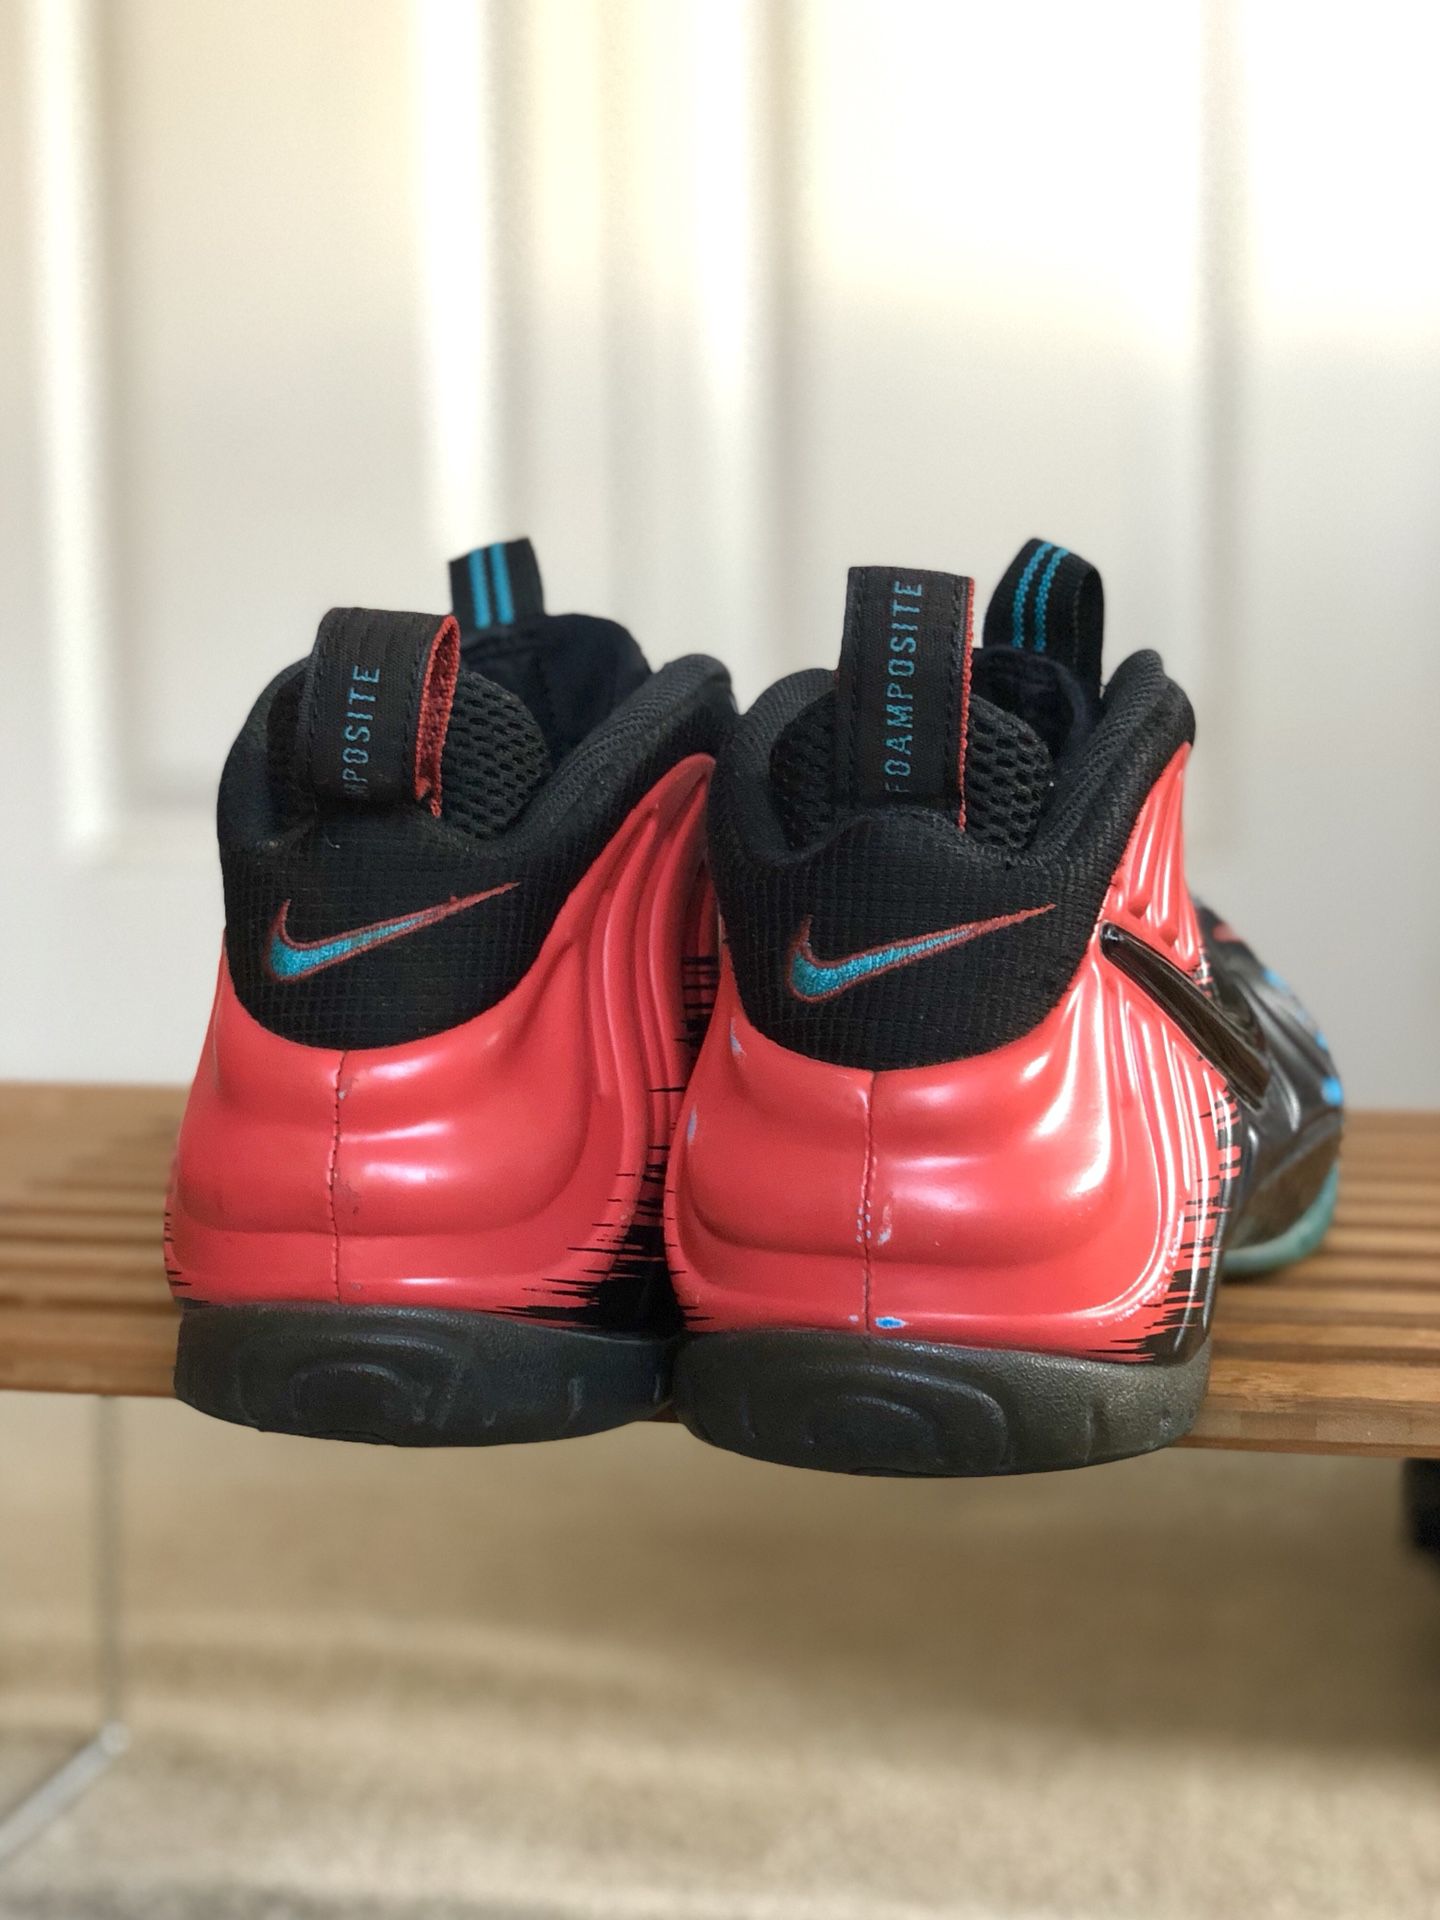 NIKE Air Foamposite Pro “SPIDERMAN” (2014) - Size 9.5 for Sale in Los  Angeles, CA - OfferUp